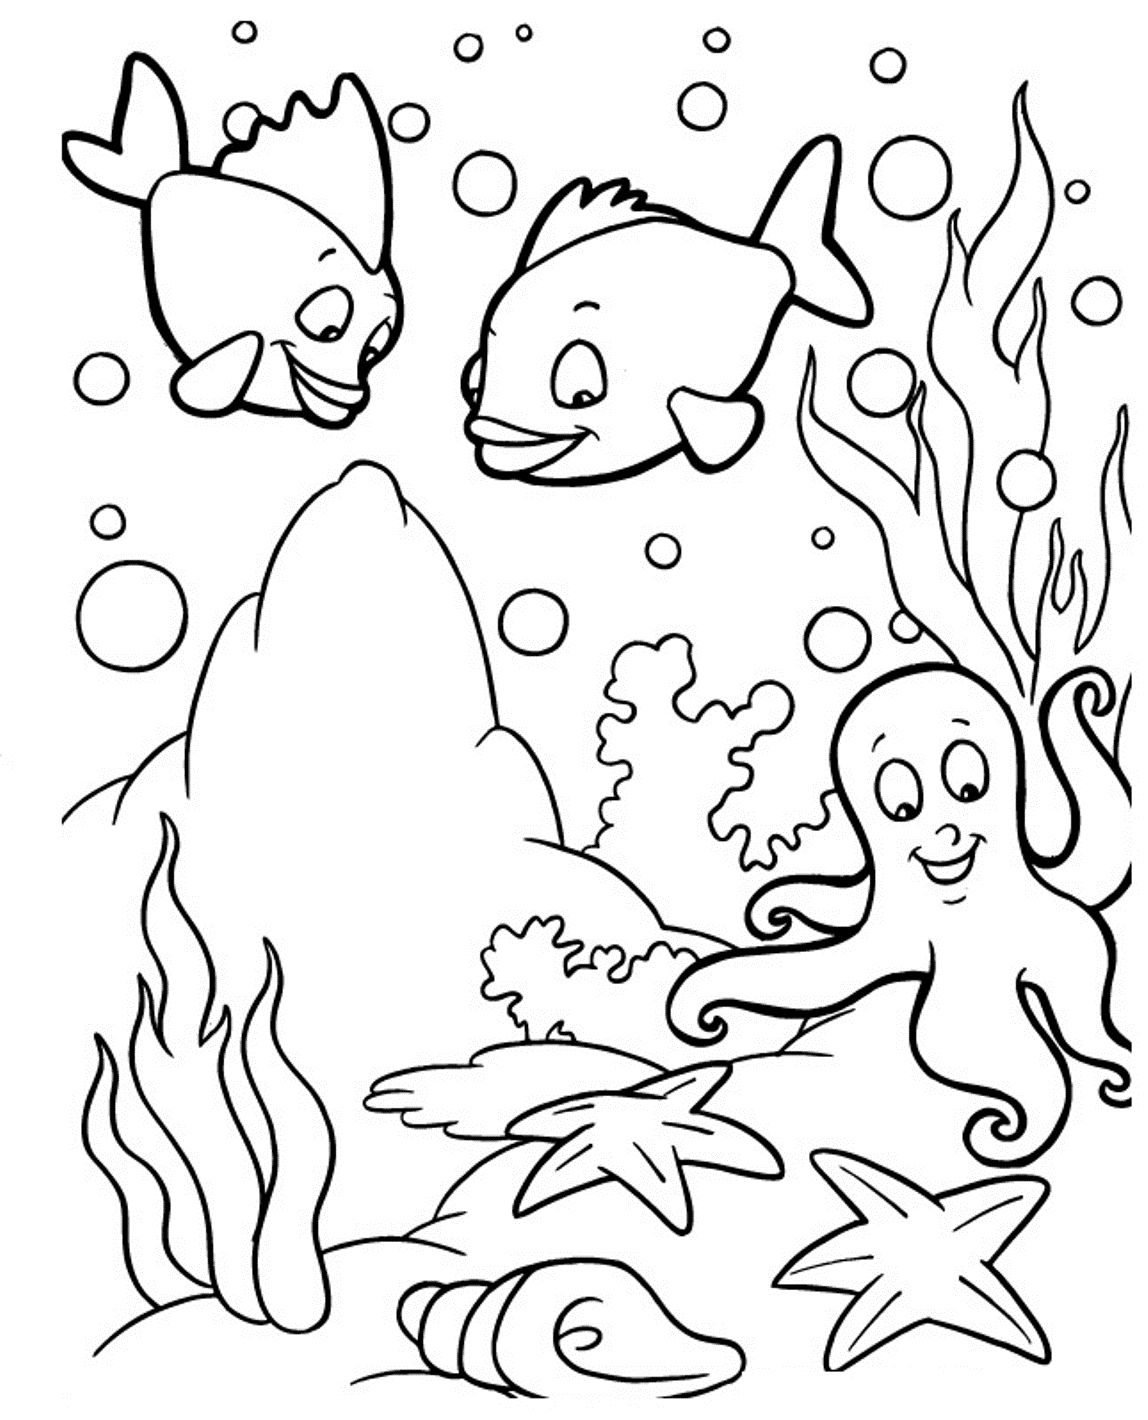 Amazing of Incridible Coloring Pages Of Sea Animals For K #323